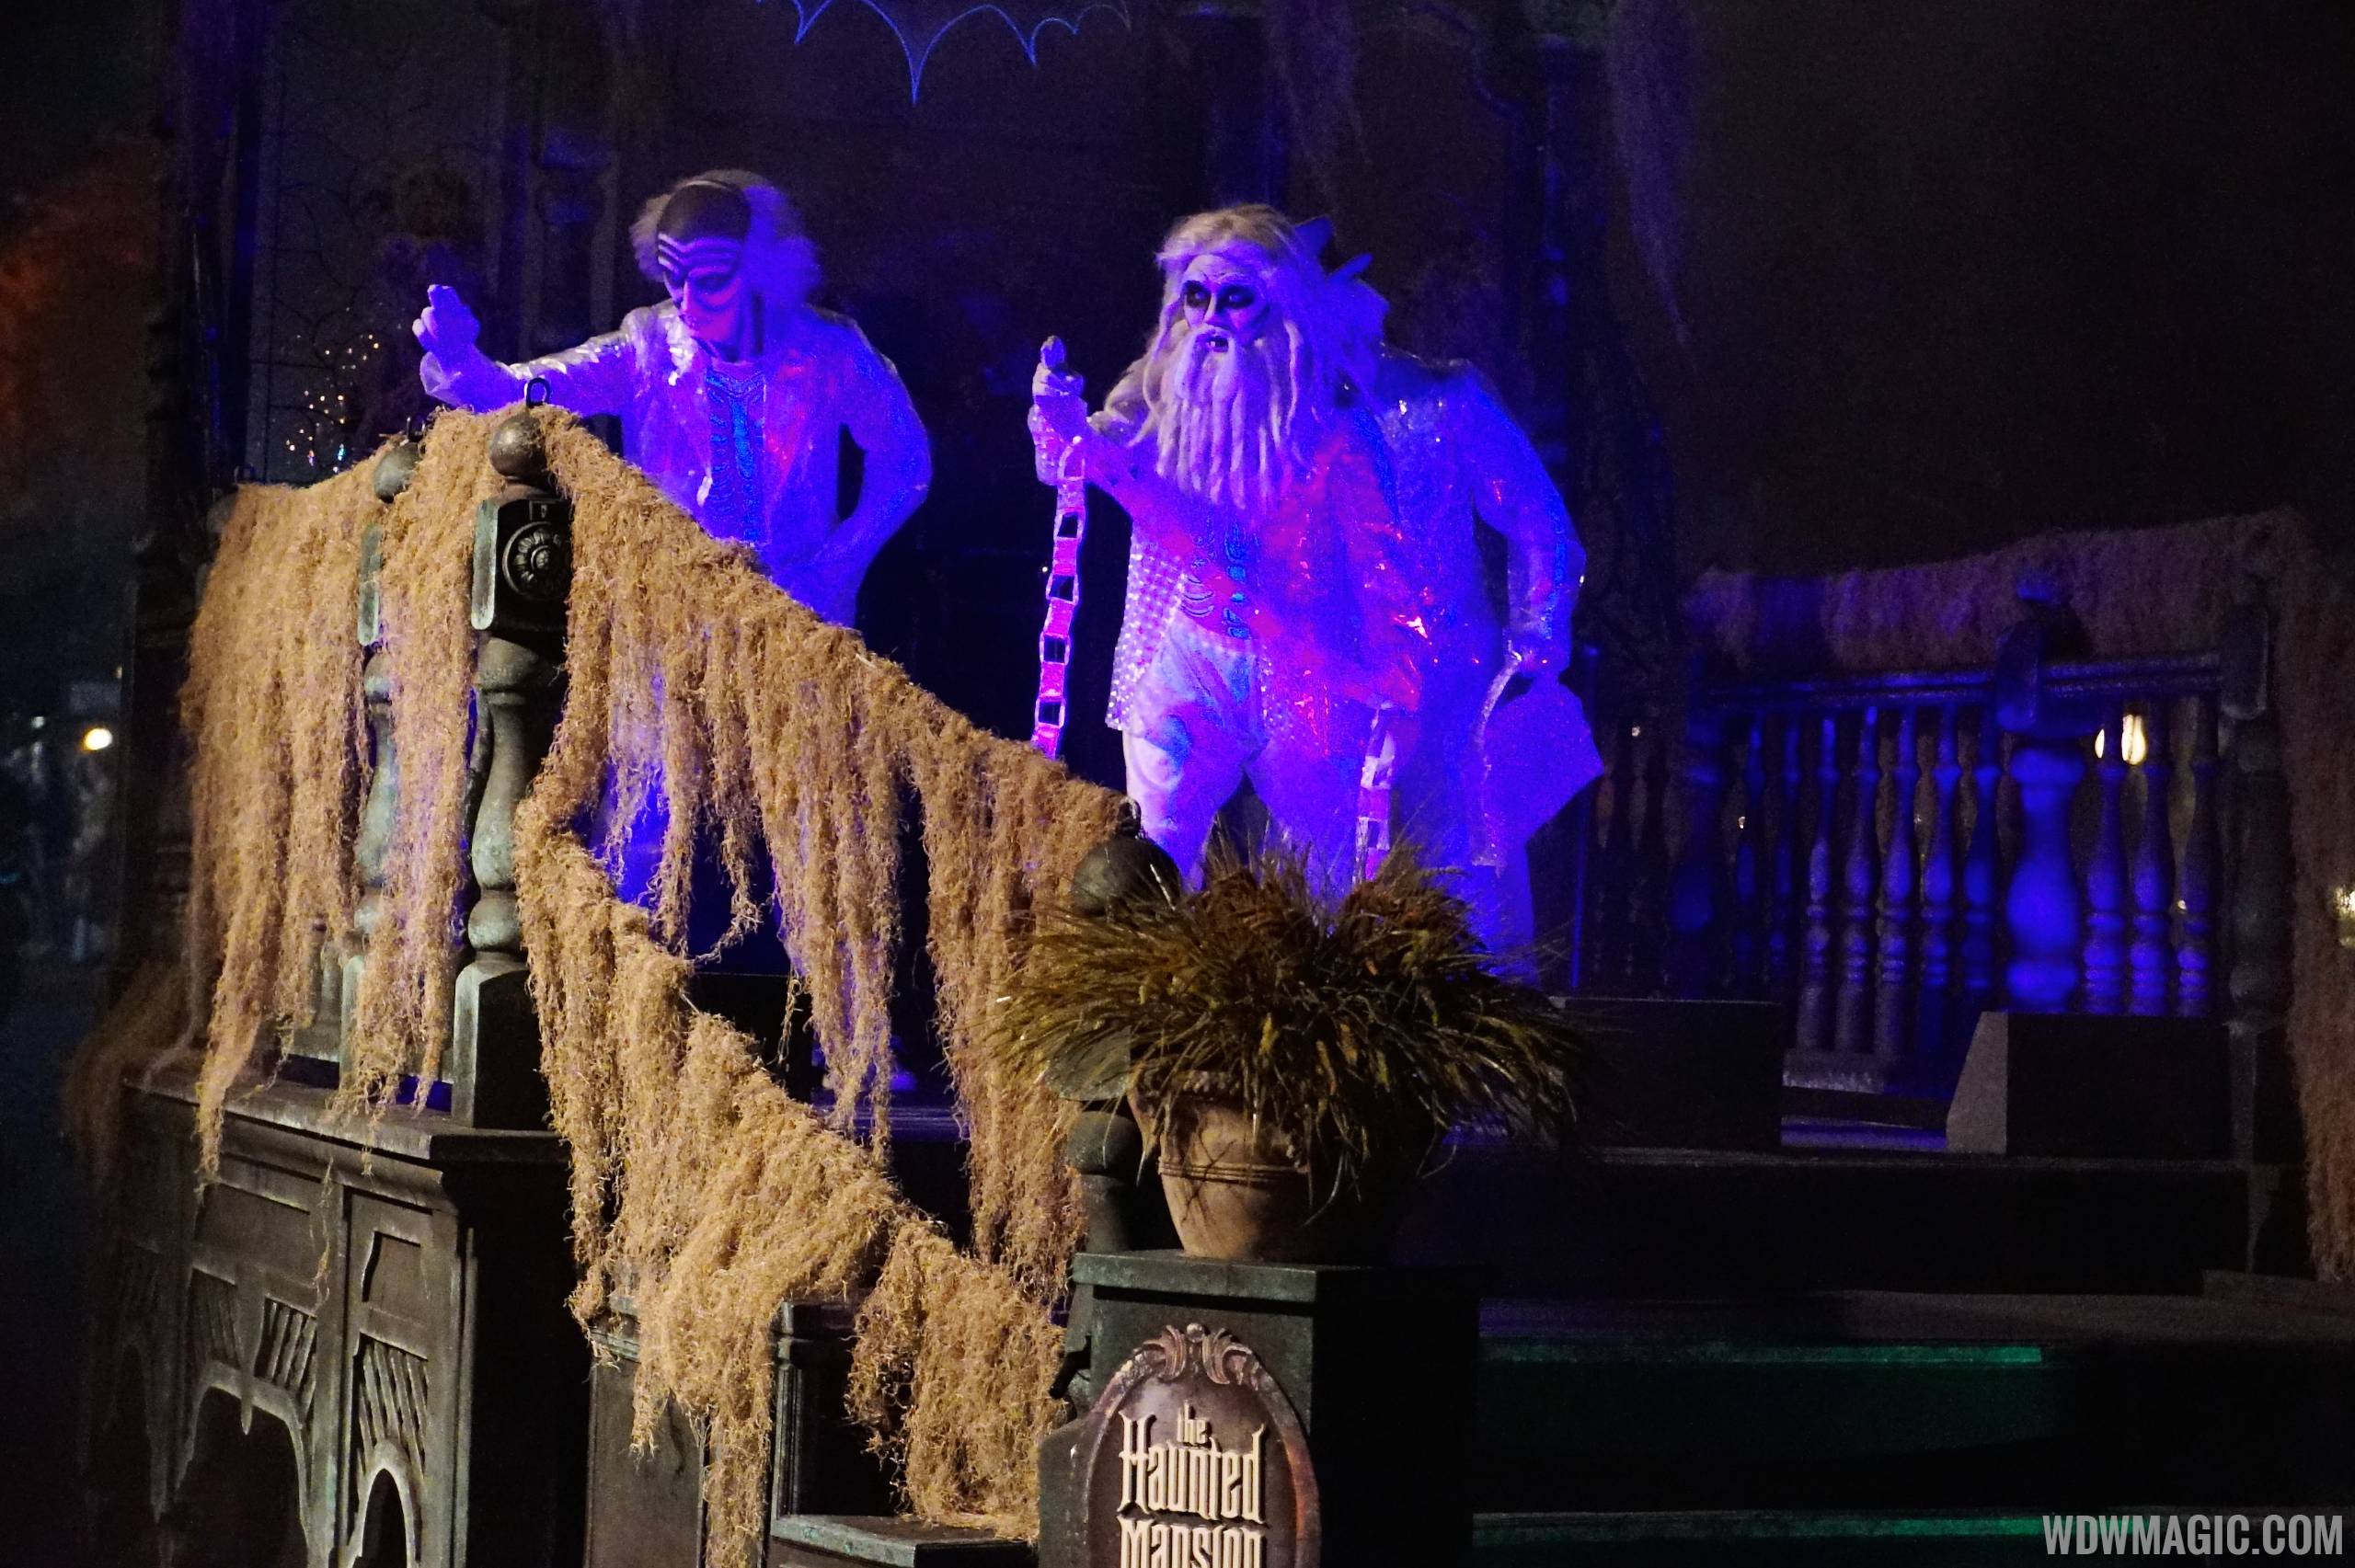 Boo To You Parade - Haunted Mansion ghosts